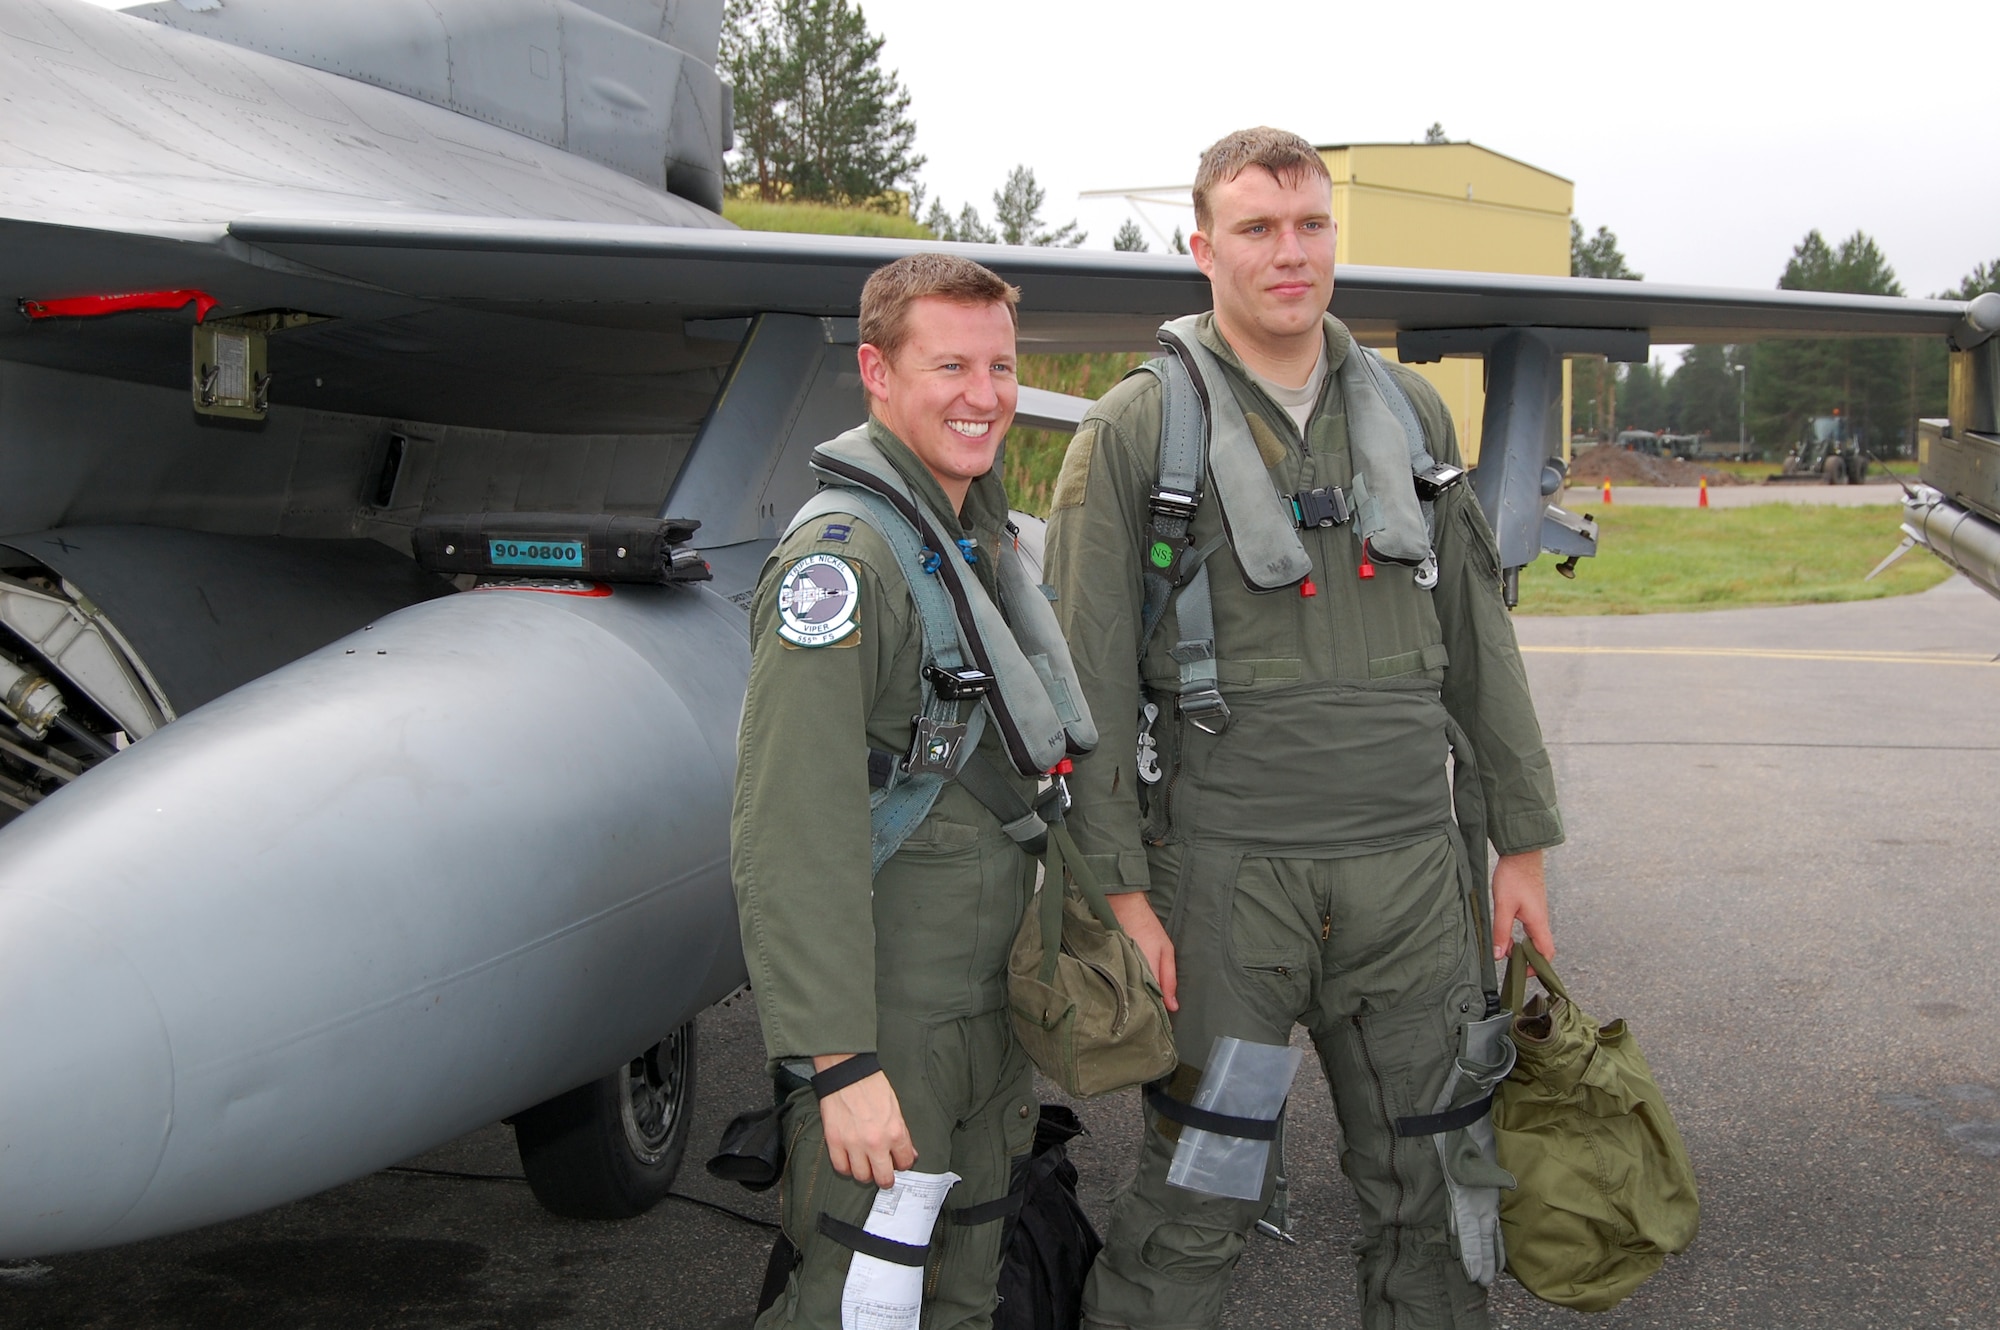 Capt. Ryan Thulin (left), 555th Fighter Squadron pilot, poses with Staff Sgt. Jared Moffitt, 31st Aircraft Maintenance Squadron weapons load crew member, after flying together on a familiarization flight in an F-16 Aug. 6, 2010 at Kallax Air Base, Sweden. The 555th FS spent two weeks working with the Swedish air force at Norrbotten Wing conducting air-to-air and air-to-ground training missions. (U.S. Air Force photo by Tech. Sgt. Lindsey Maurice/Released)